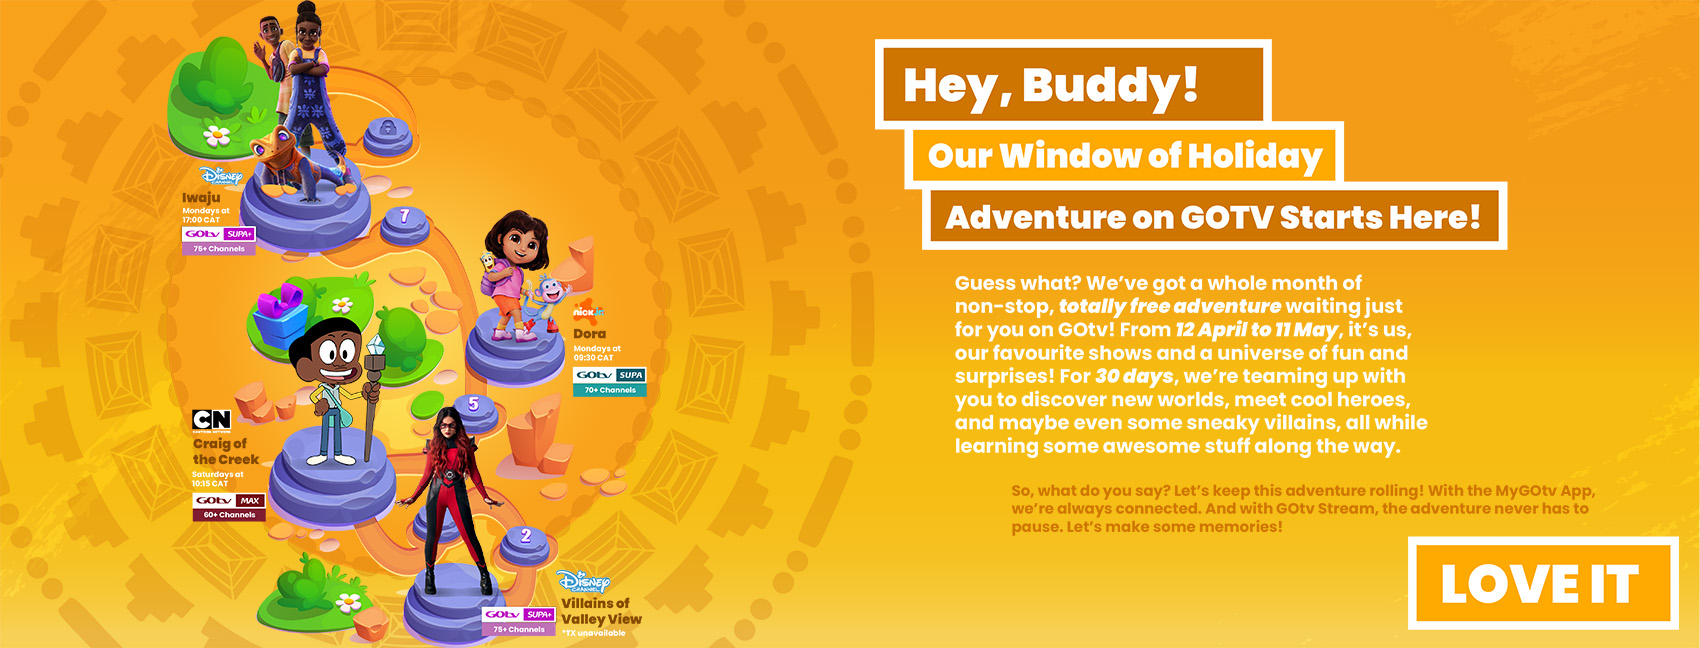 Make it a holiday of more fun and adventure with GOtv Kids Open Window!